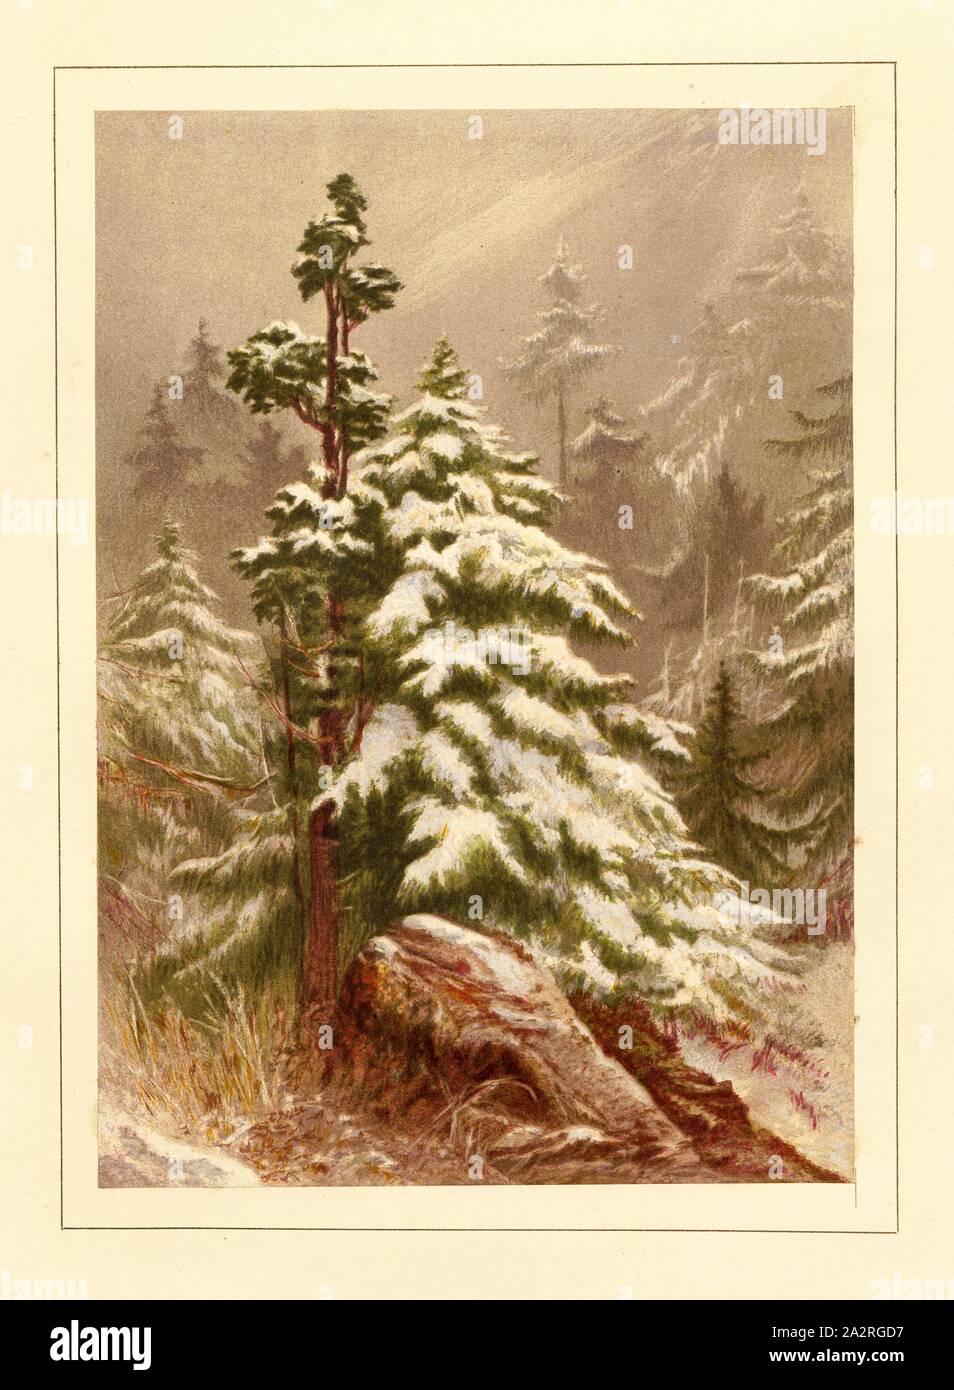 Winter, Winter landscape in the Alps, Fig. 4, according to p. 8, Walton, Elijah (pinx.); Lowes, J. H. (chromolith. after Elijah Walton), 1867, Elijah Walton; J. H. Lowes; Thomas G. Bonney: The peaks and valleys of the Alps. London: published by Day and Son, limited, 1867 Stock Photo